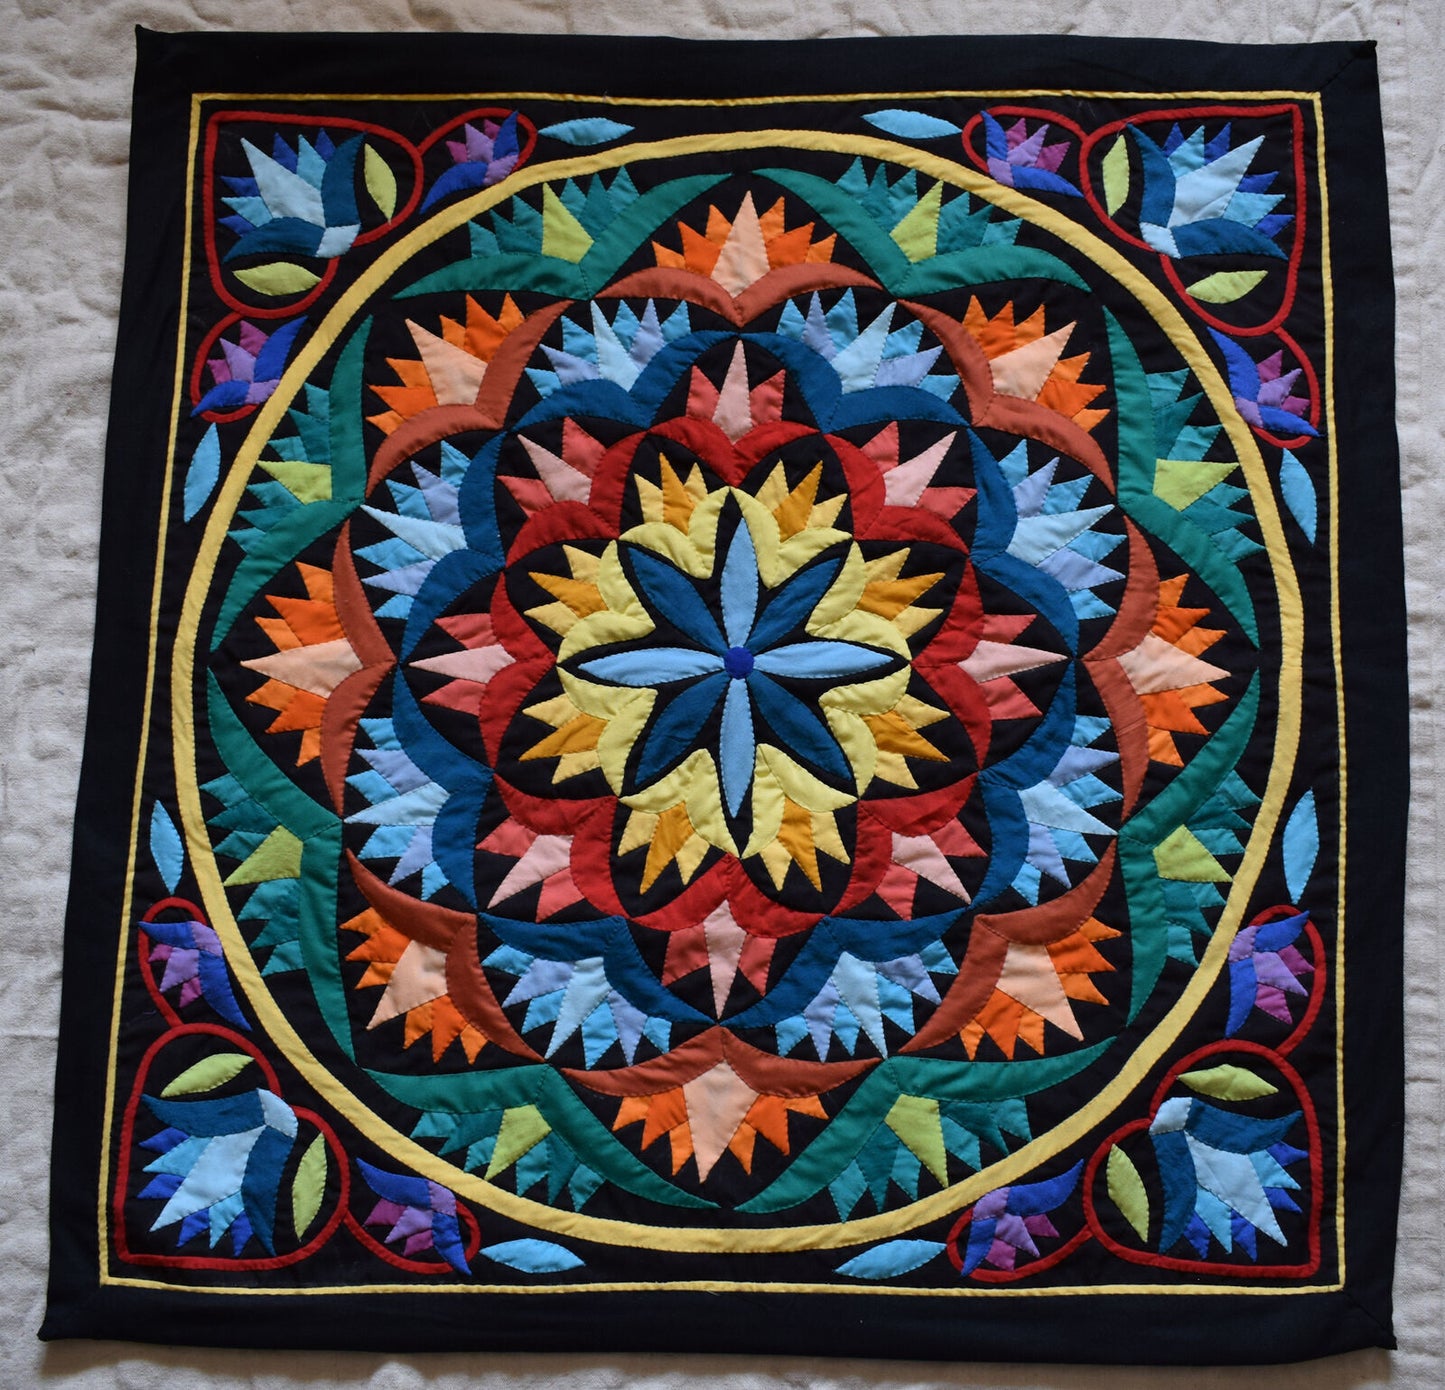 Hand stitched Egyptian colorful applique quilt patchwork/wall hanging Tapestry